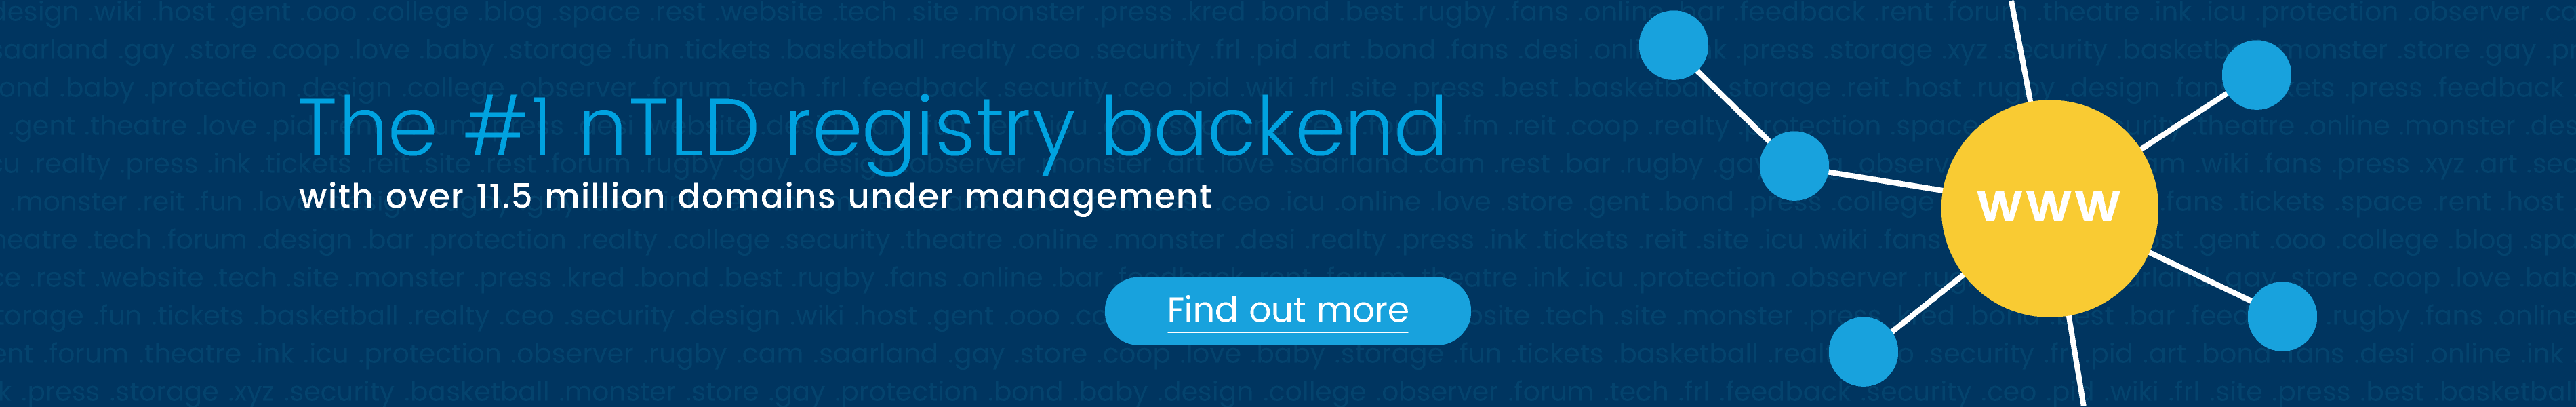 The #1 gTLD registry backend with over 9.5 million domains under management